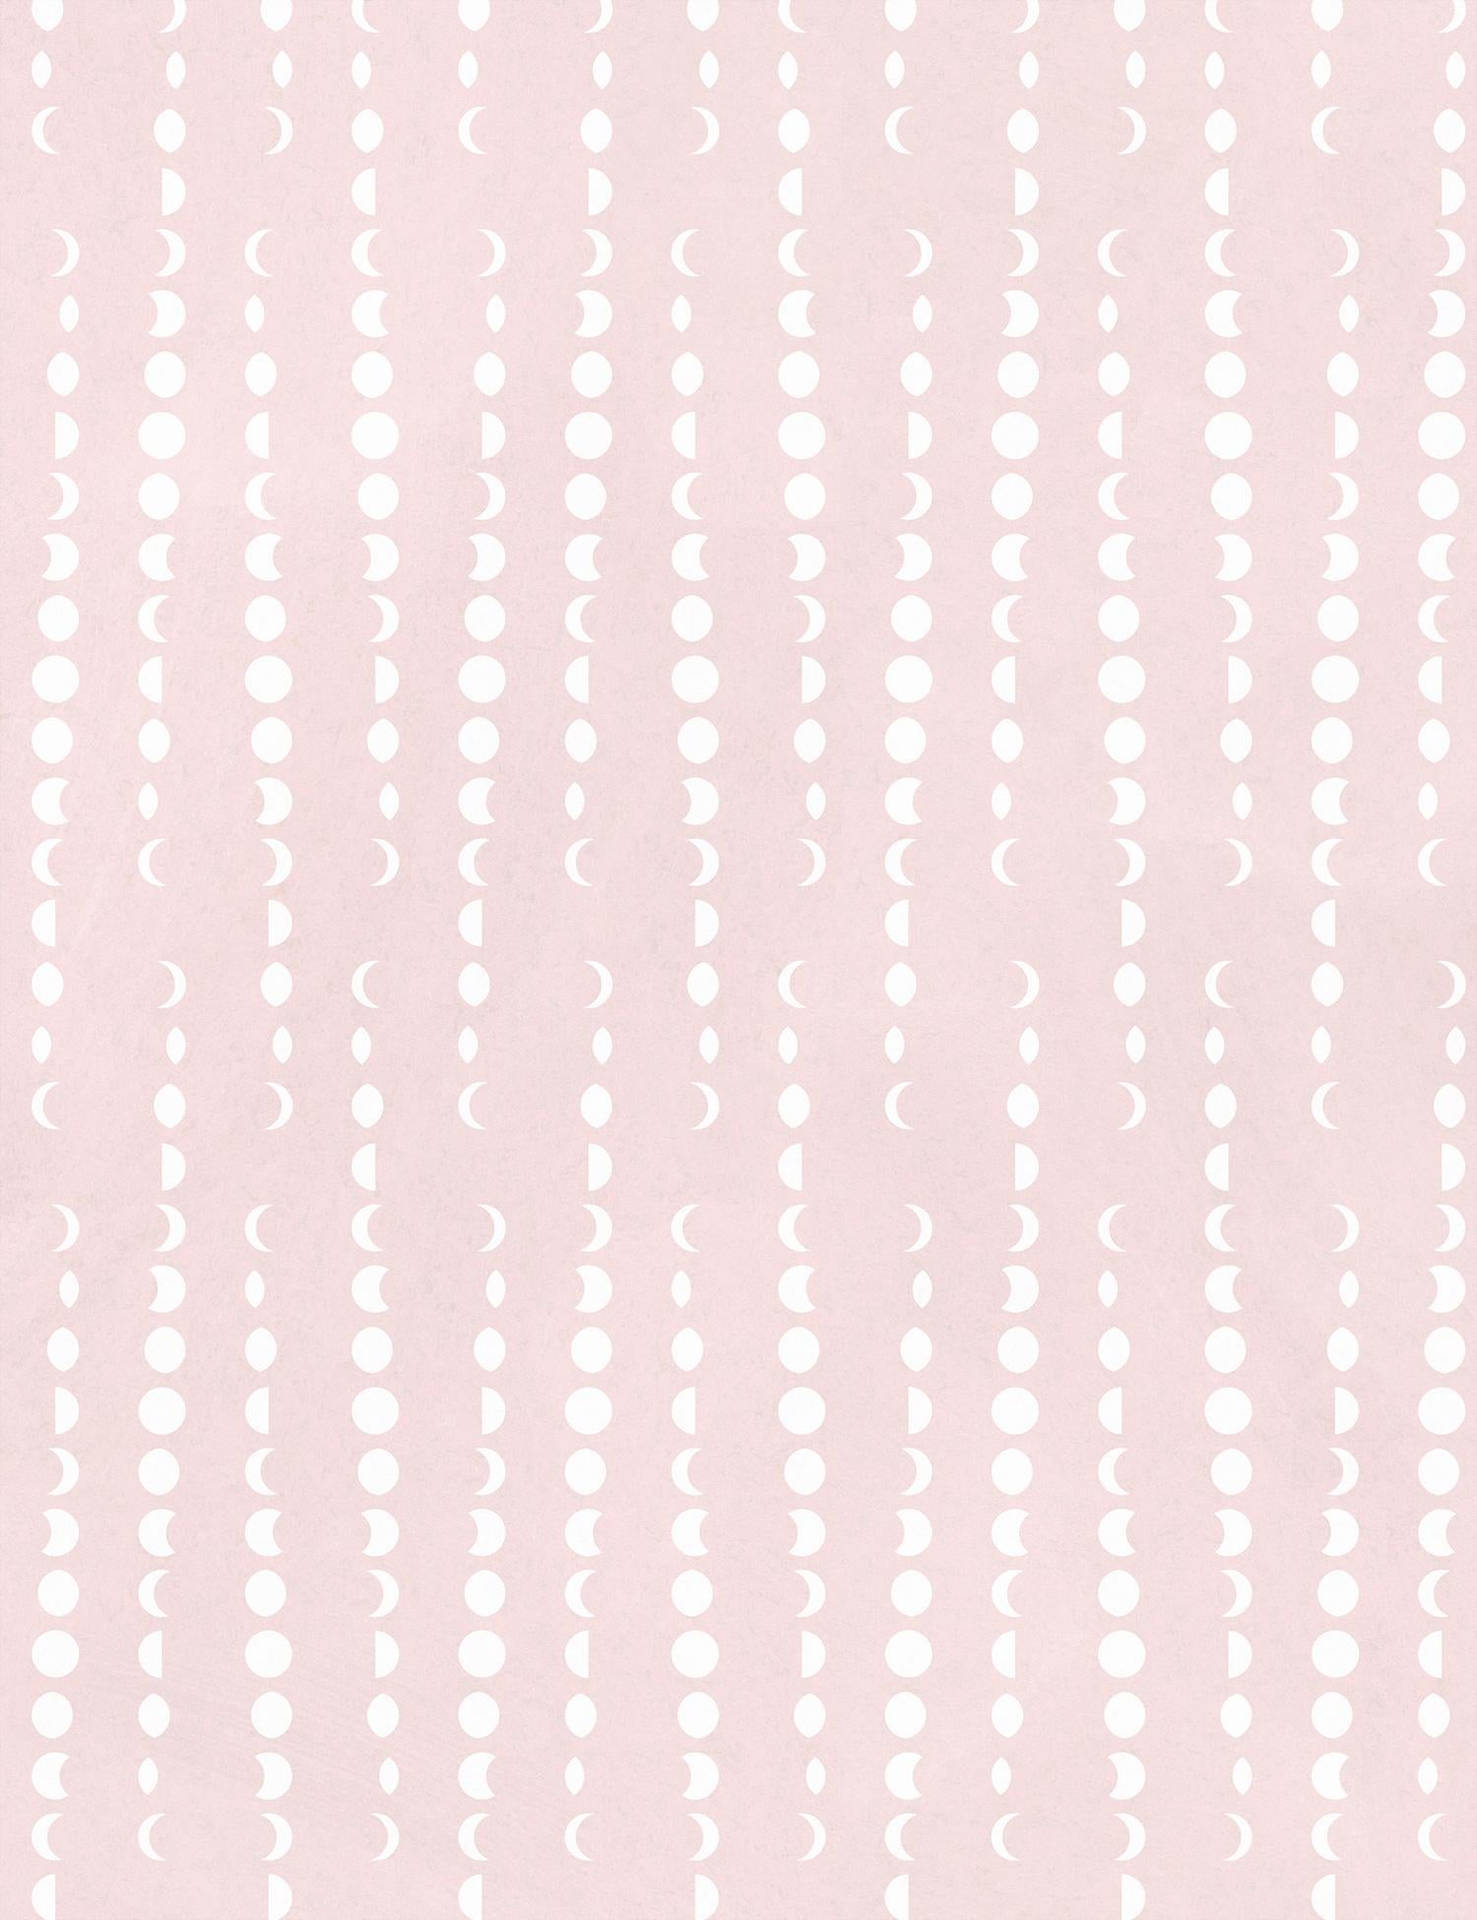 Moon Phases Plain Pink Background